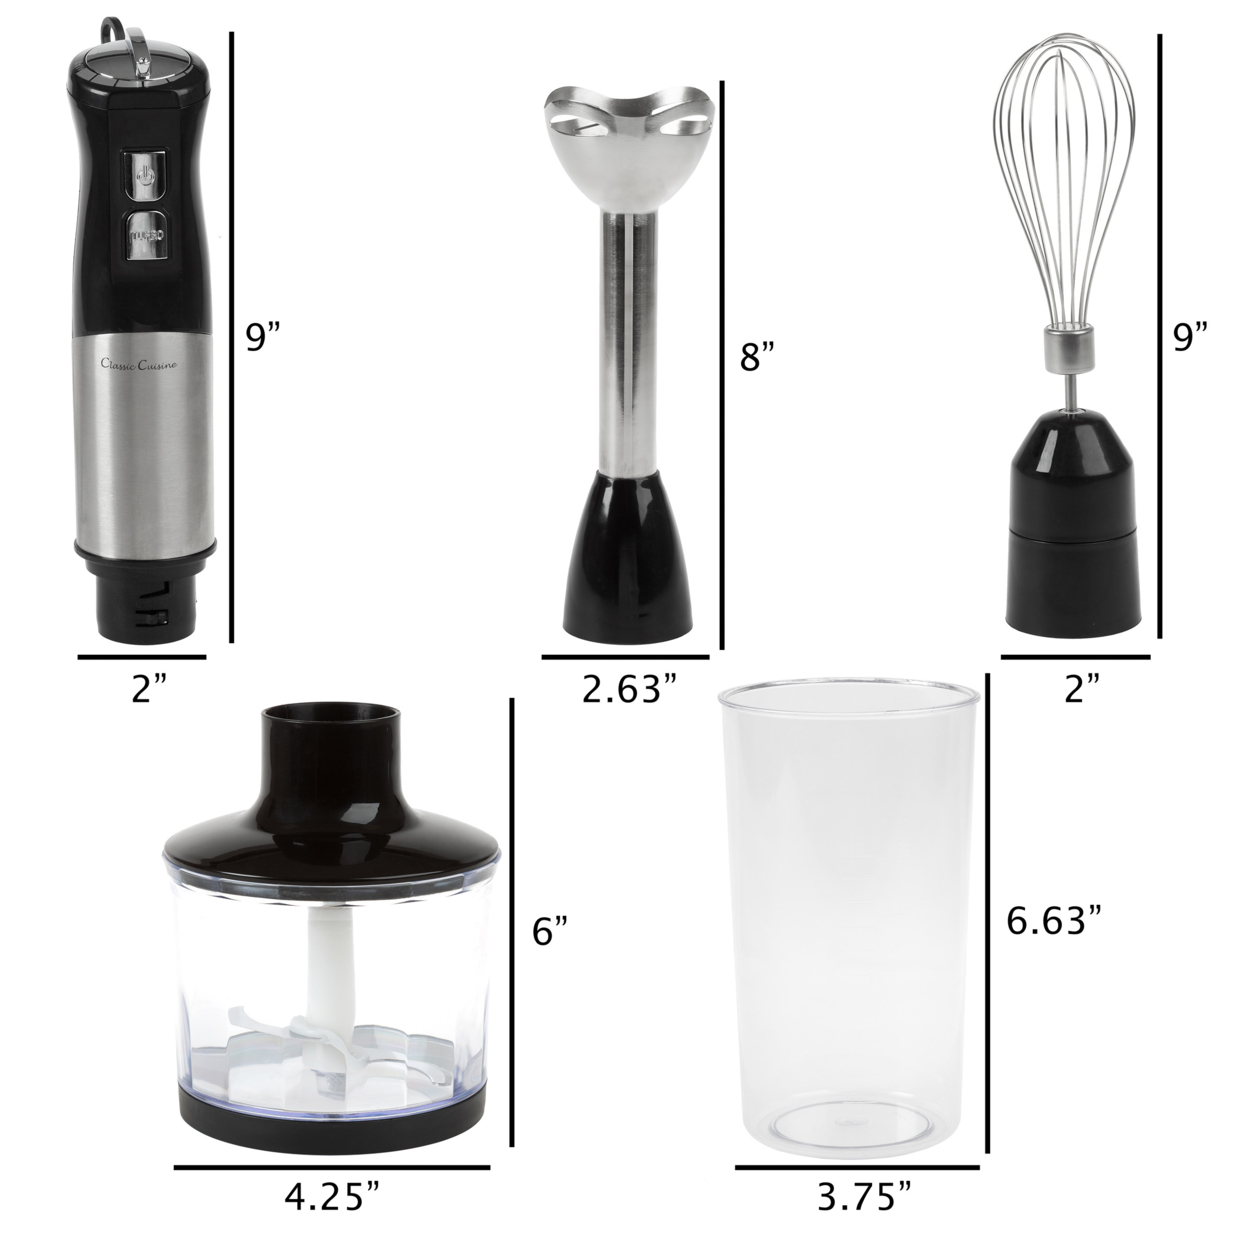 Classic Cuisine 4-In-1 Stainless Steel Immersion Blender Set